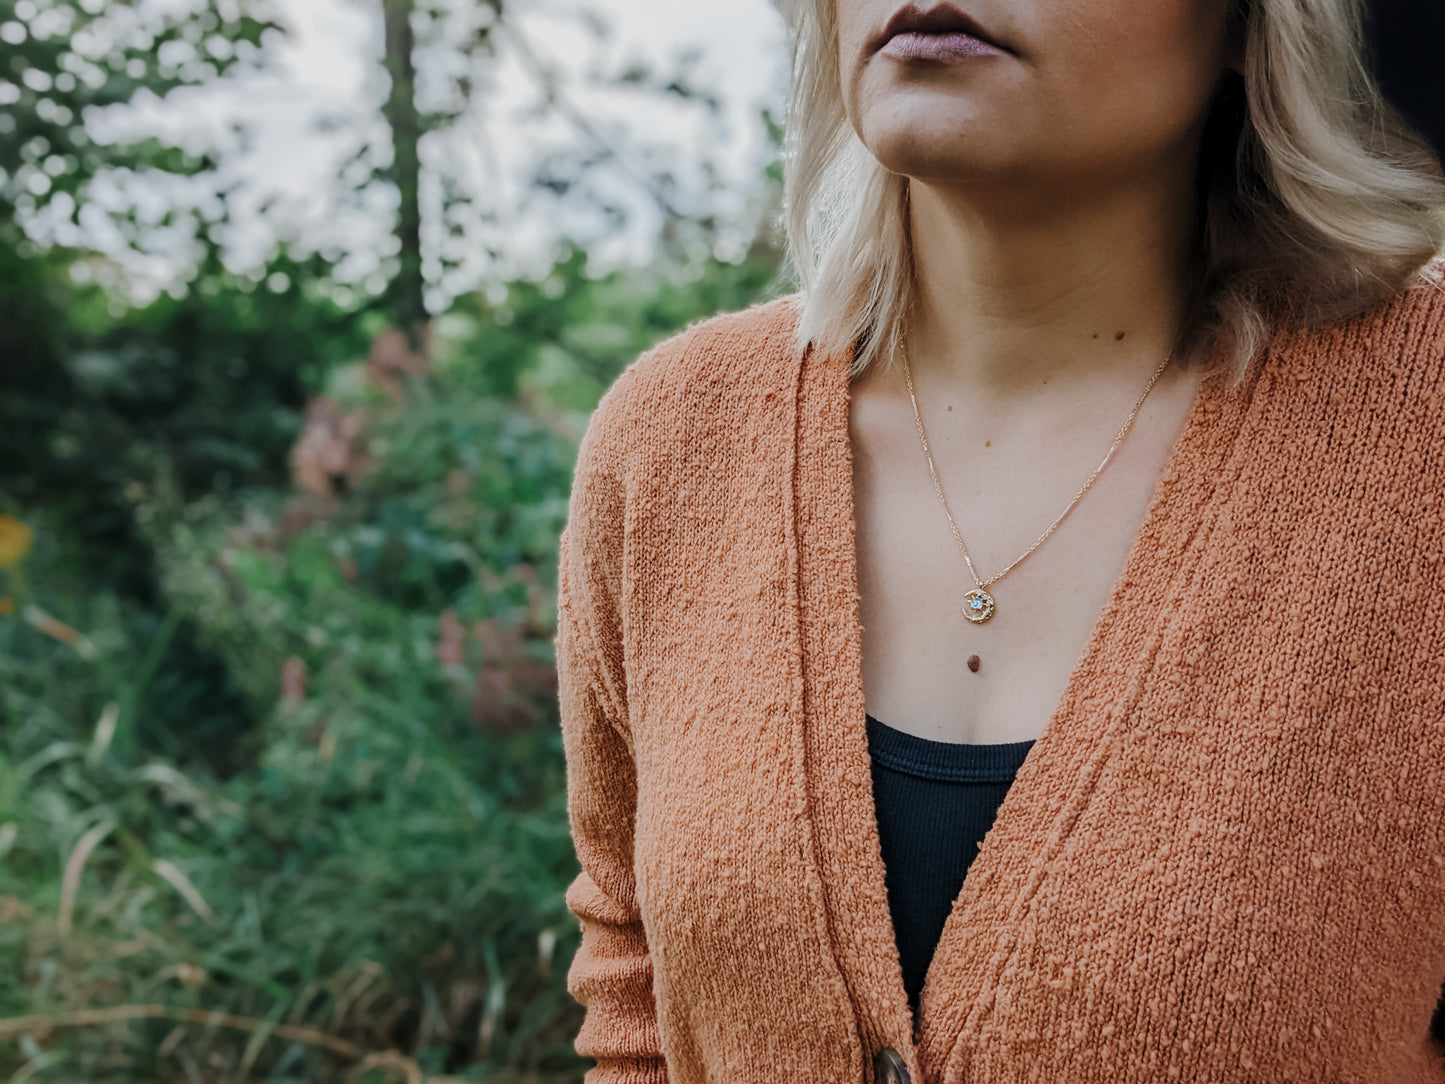 HARVEST MOON | Dainty Necklace